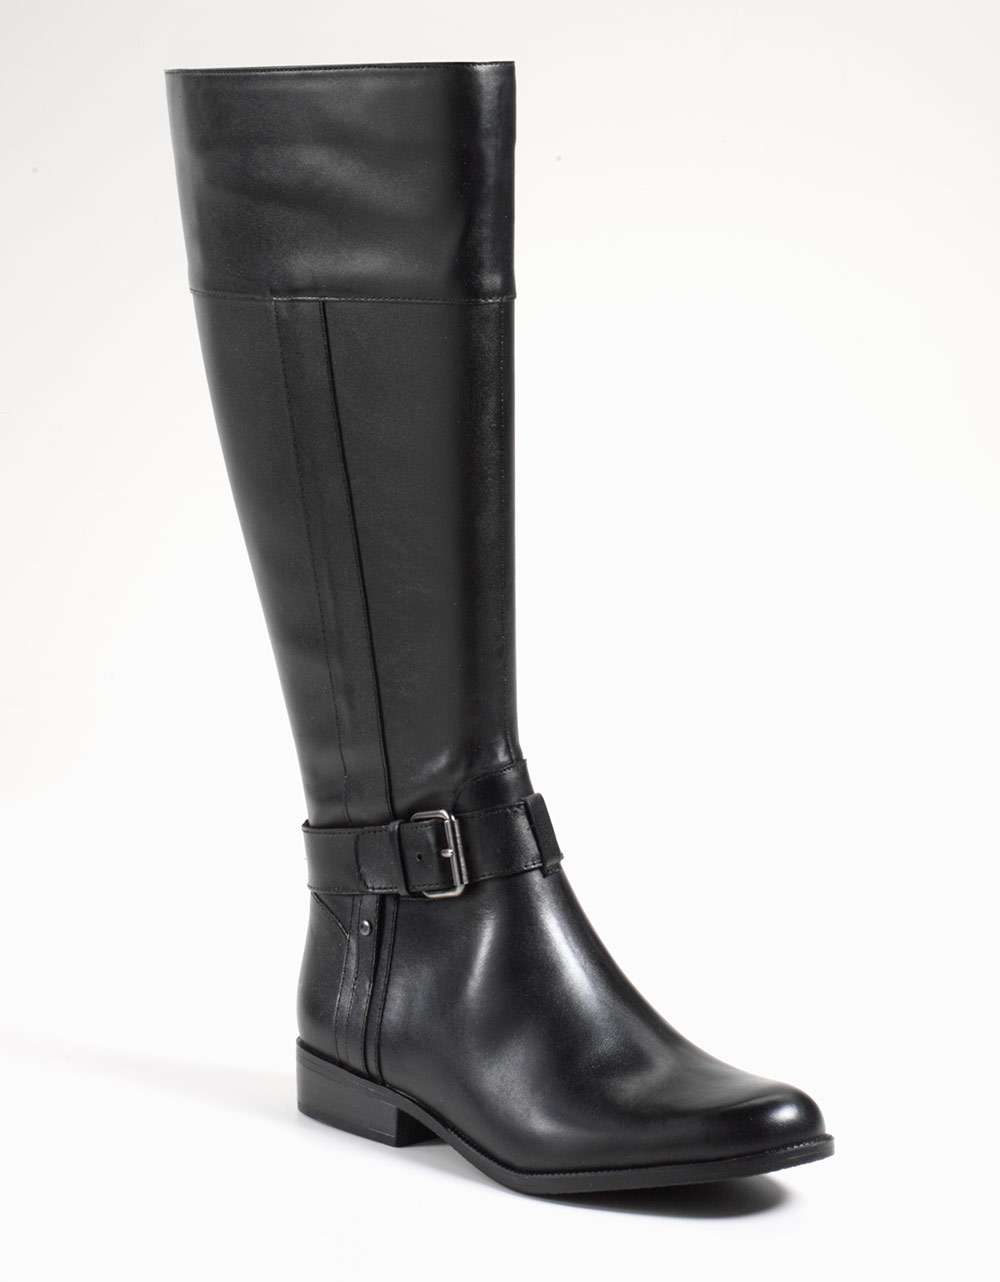 Anne klein Costaro Leather Riding Boots in Black | Lyst